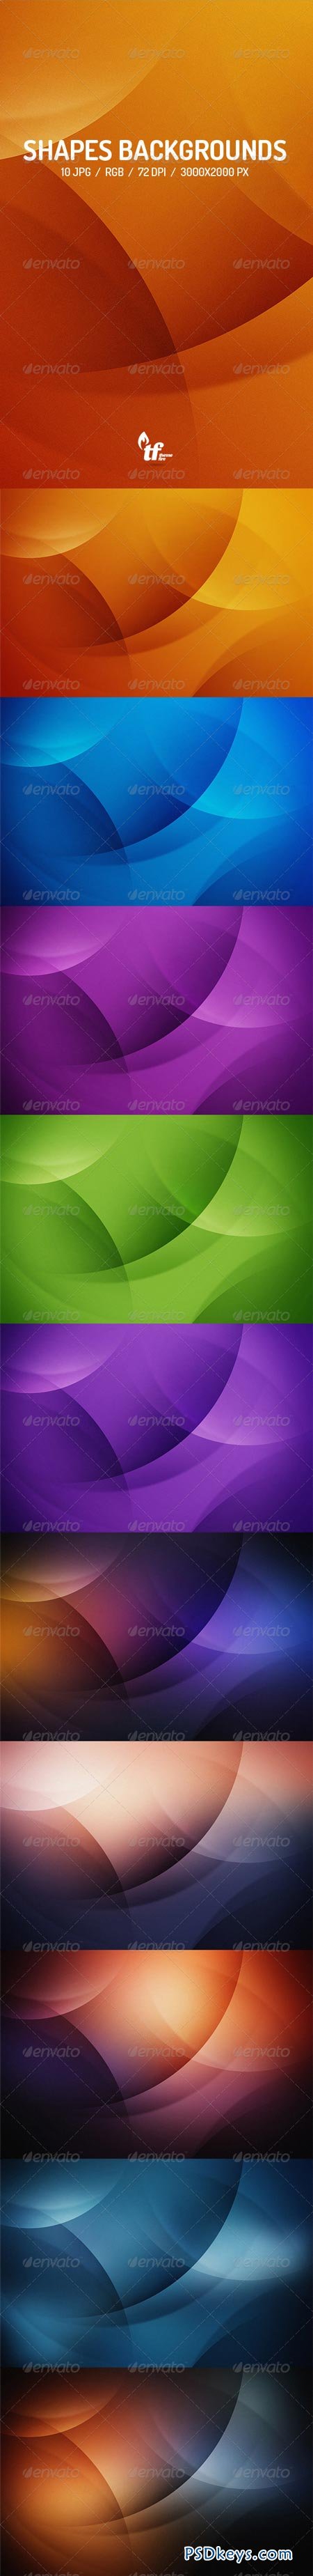 Shapes Backgrounds 7812806